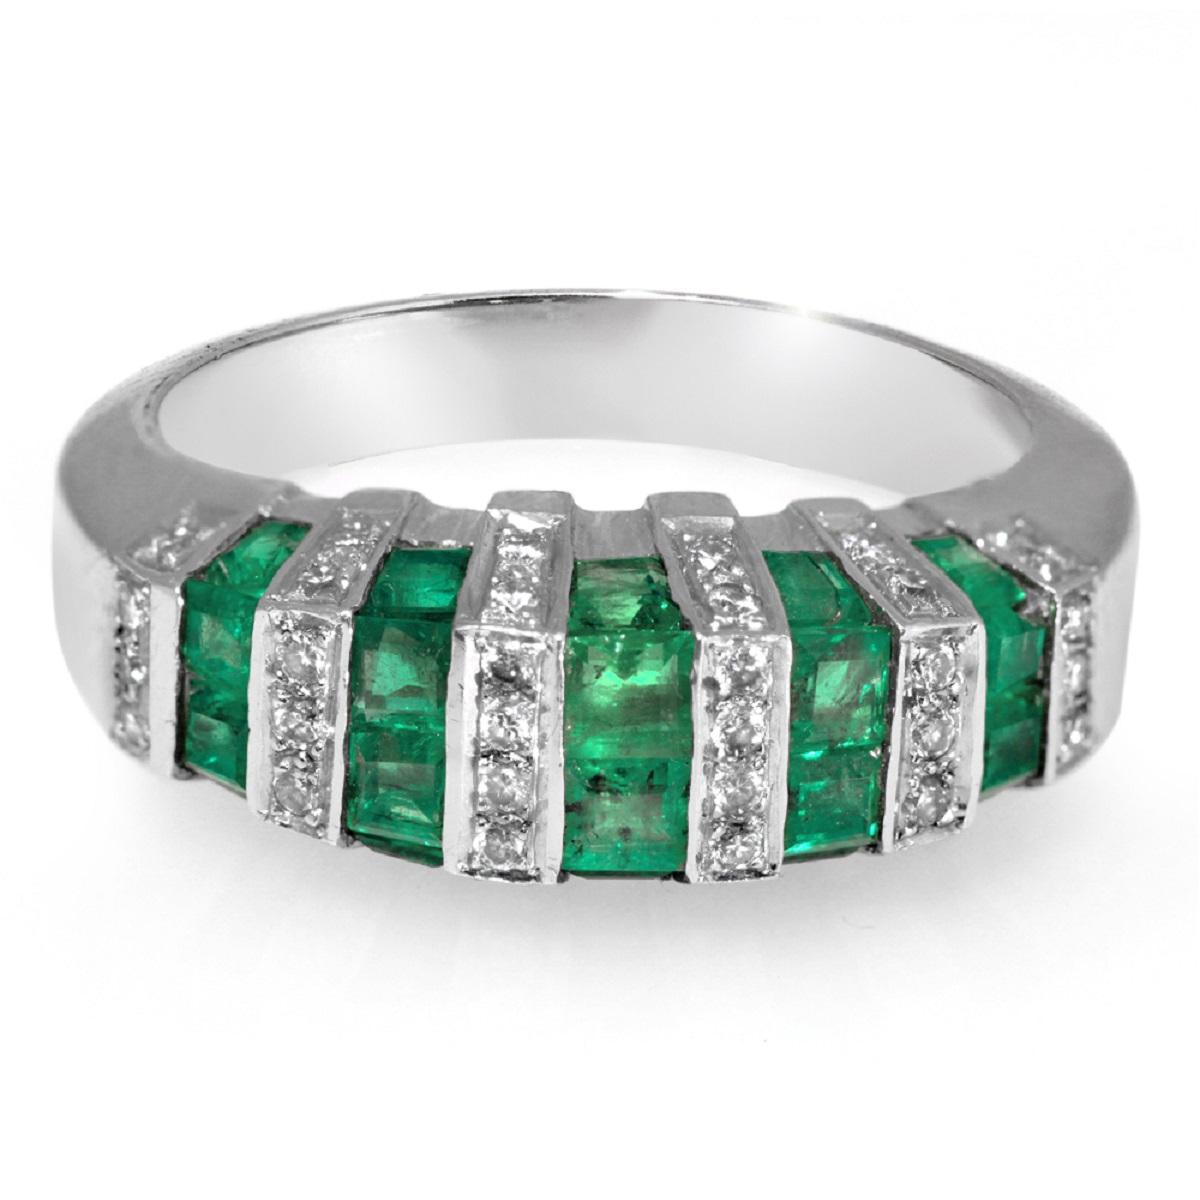 Type: Ring
Top:7.5 mm
Band Width: 3.2 mm
Metal: White Gold
Metal Purity: 18K
Size:6 to 9
Hallmarks: 18K
Total Weight: 6.3 Grams
Stone Type: 1.92 Natural Emerald and 0.25 Ct VS2 G Diamonds
Condition: New
Stock Number: BL13
..

Please Message Us for